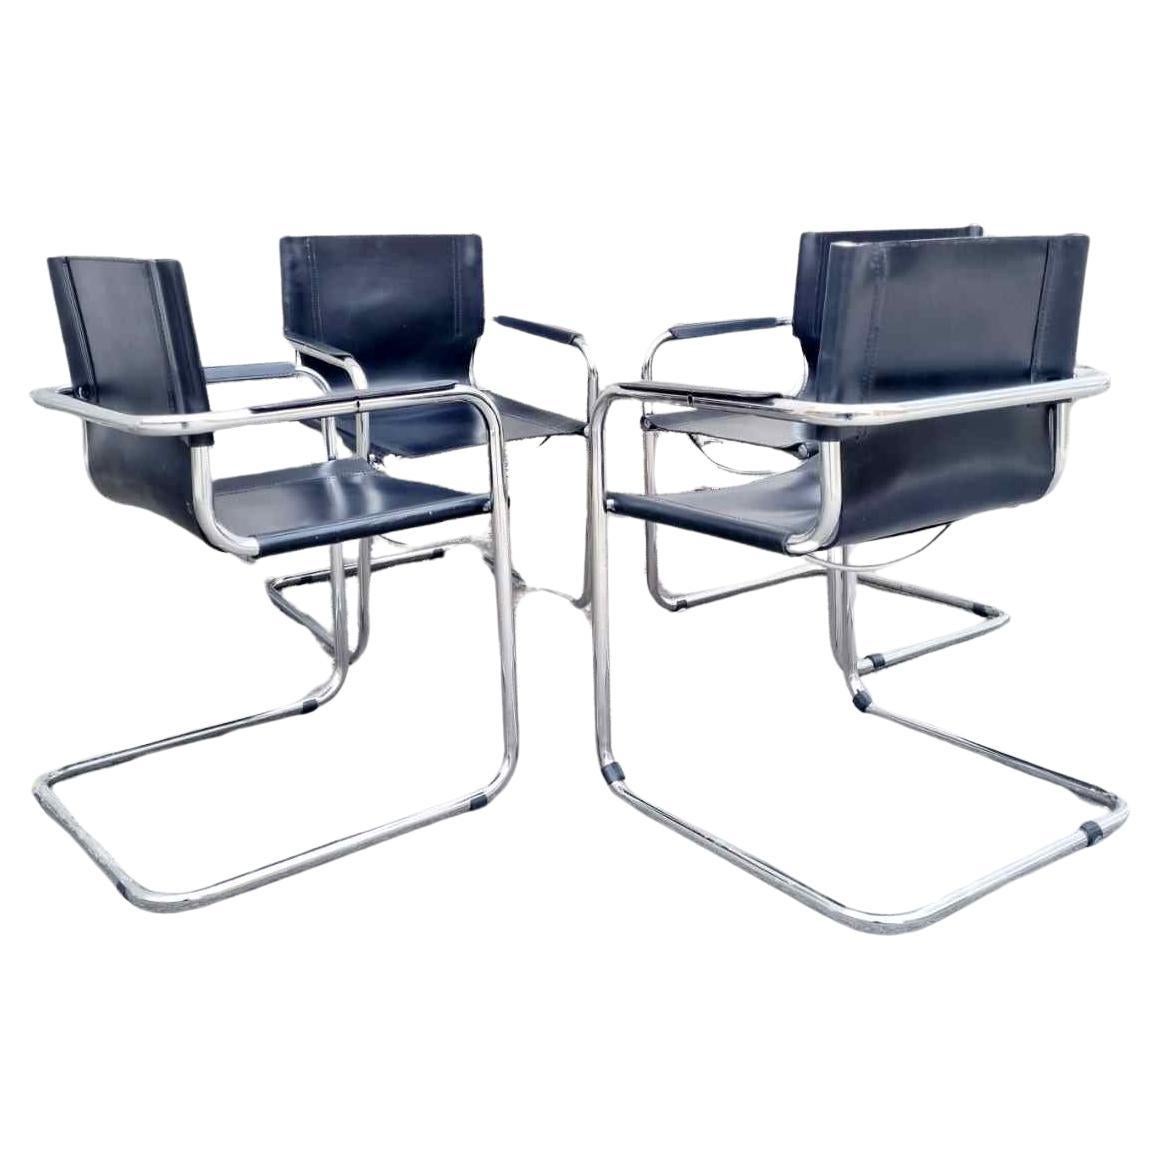 Bauhaus Cantilever MG5 Visitor Leather Chairs, Design Mart Stam, Italy 70s For Sale